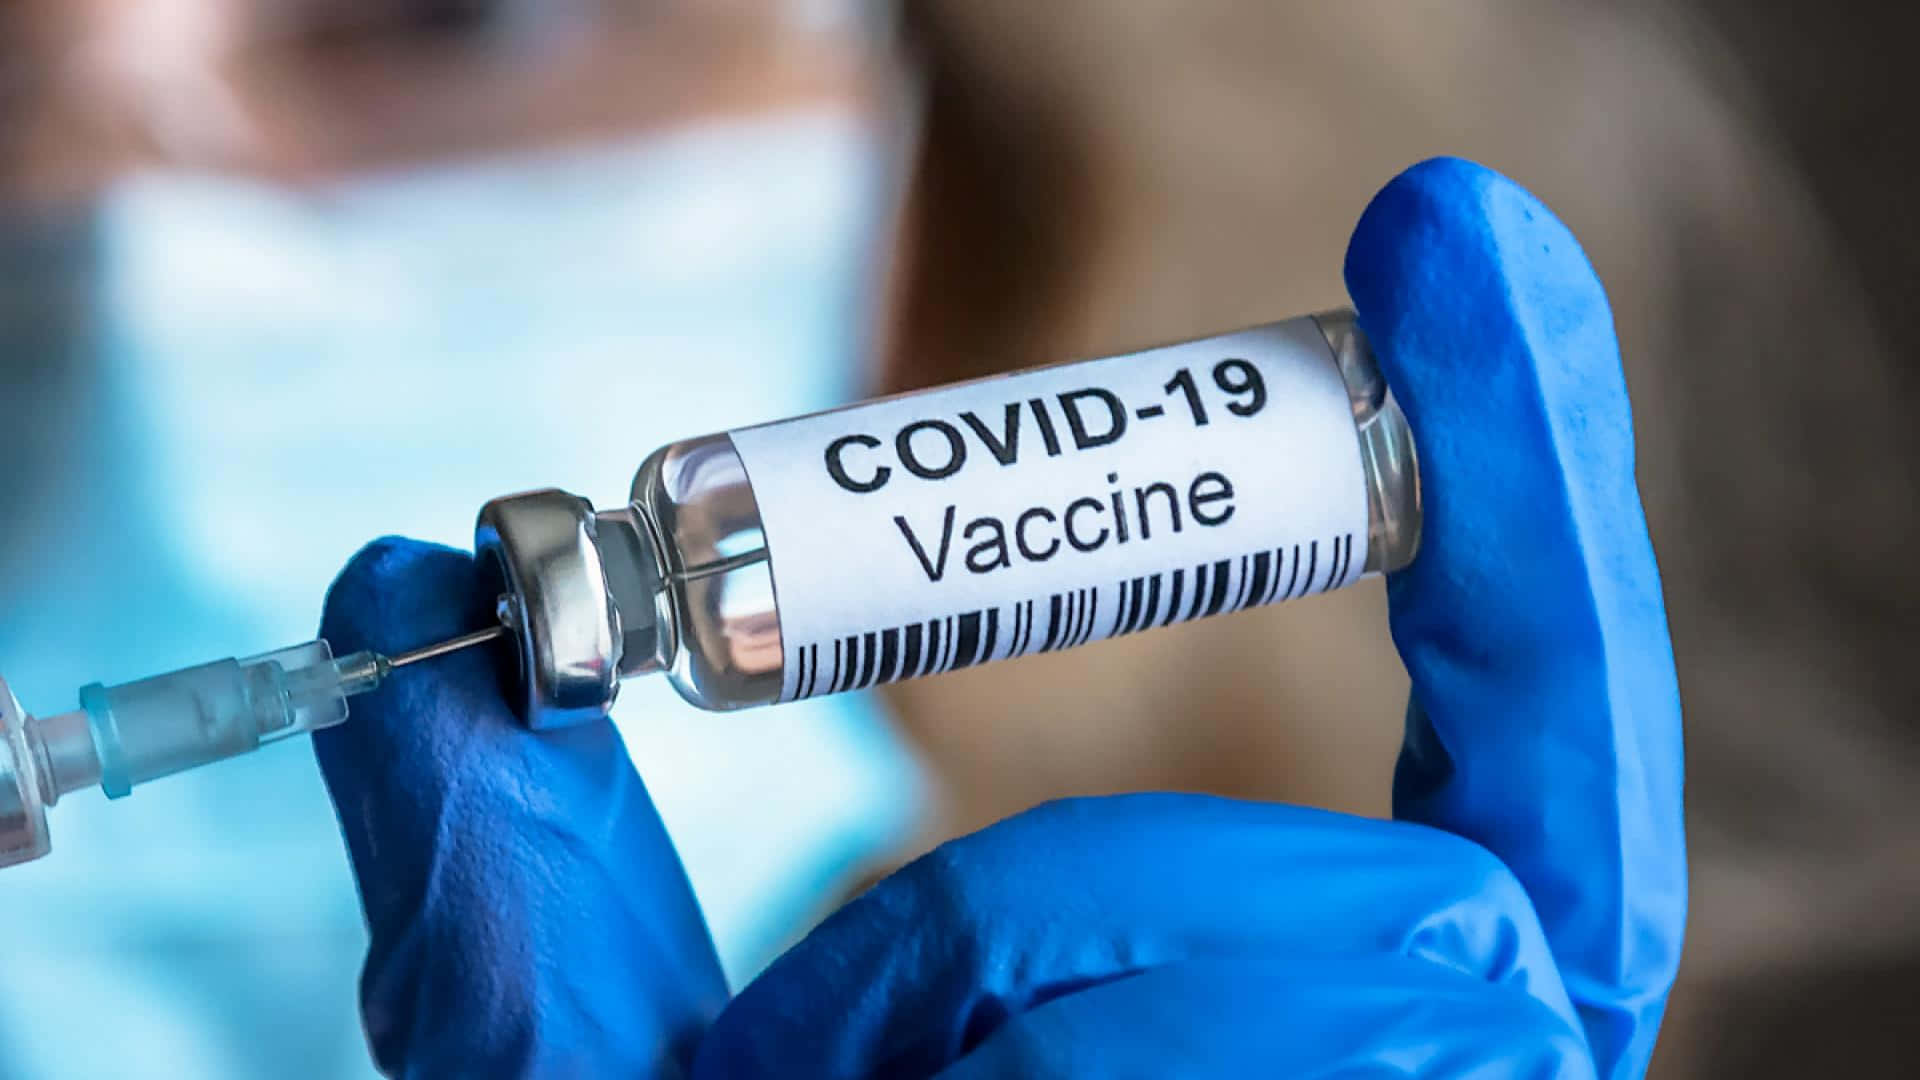 Female Doctor Holding Covid-19 Vaccine Background